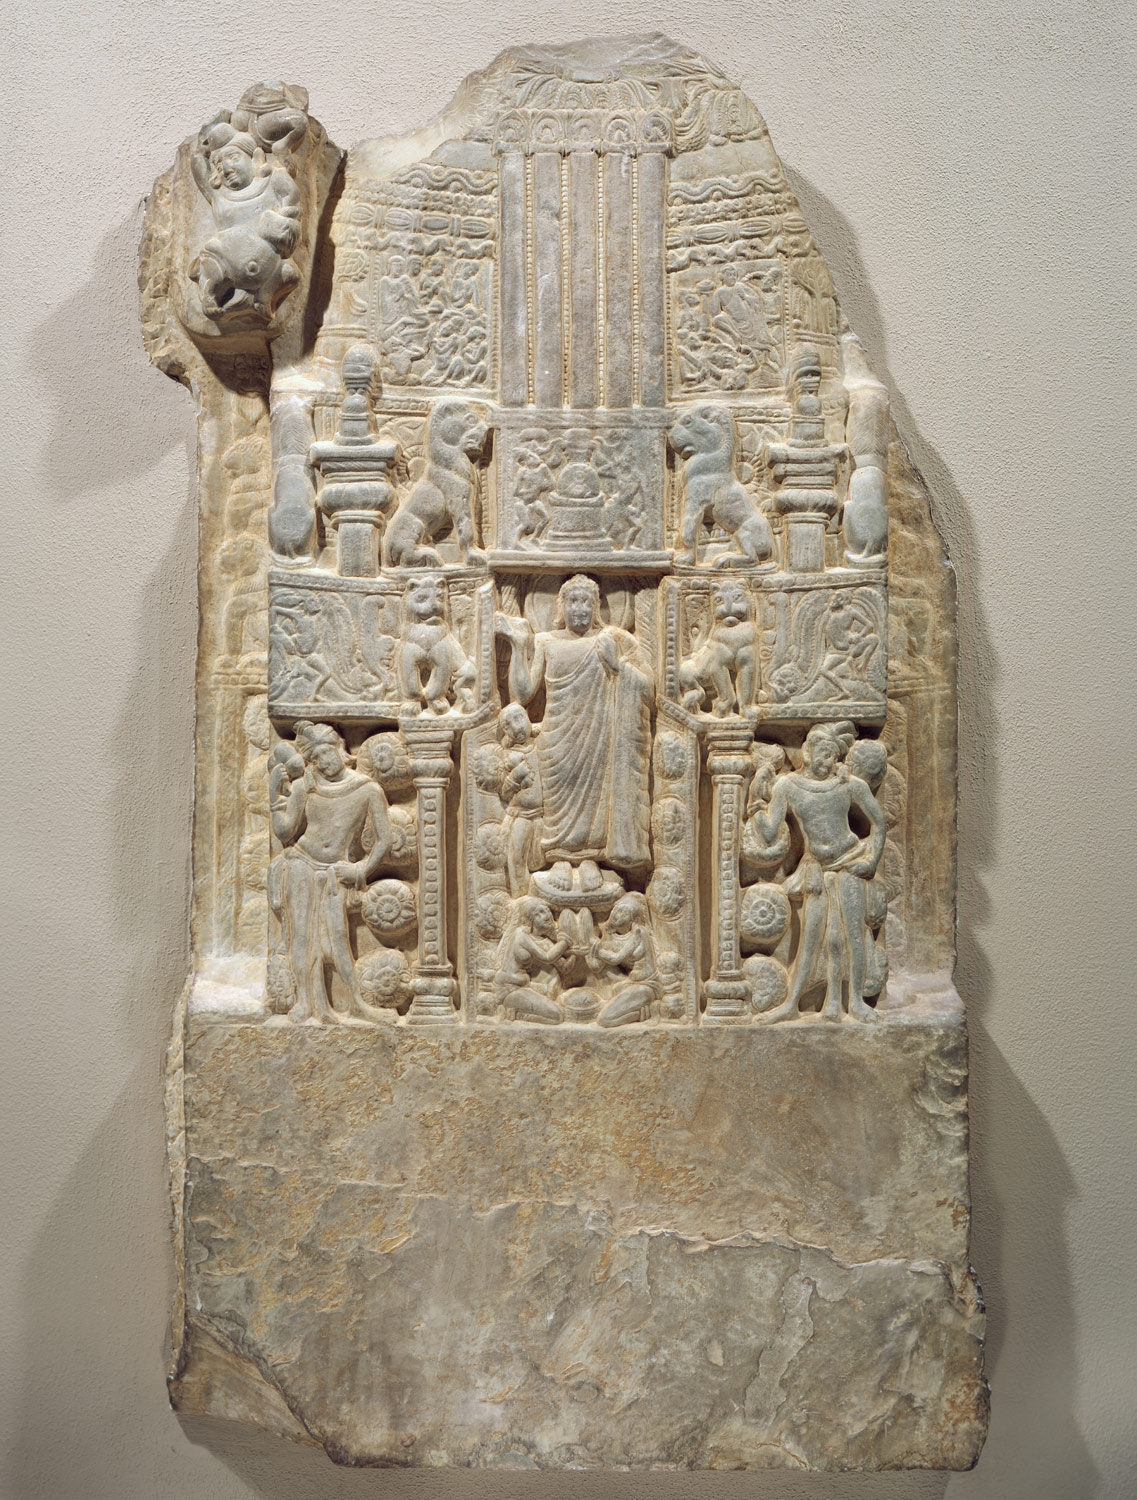 Drum Slab Showing the Buddha Standing in the Gateway of a Stupa